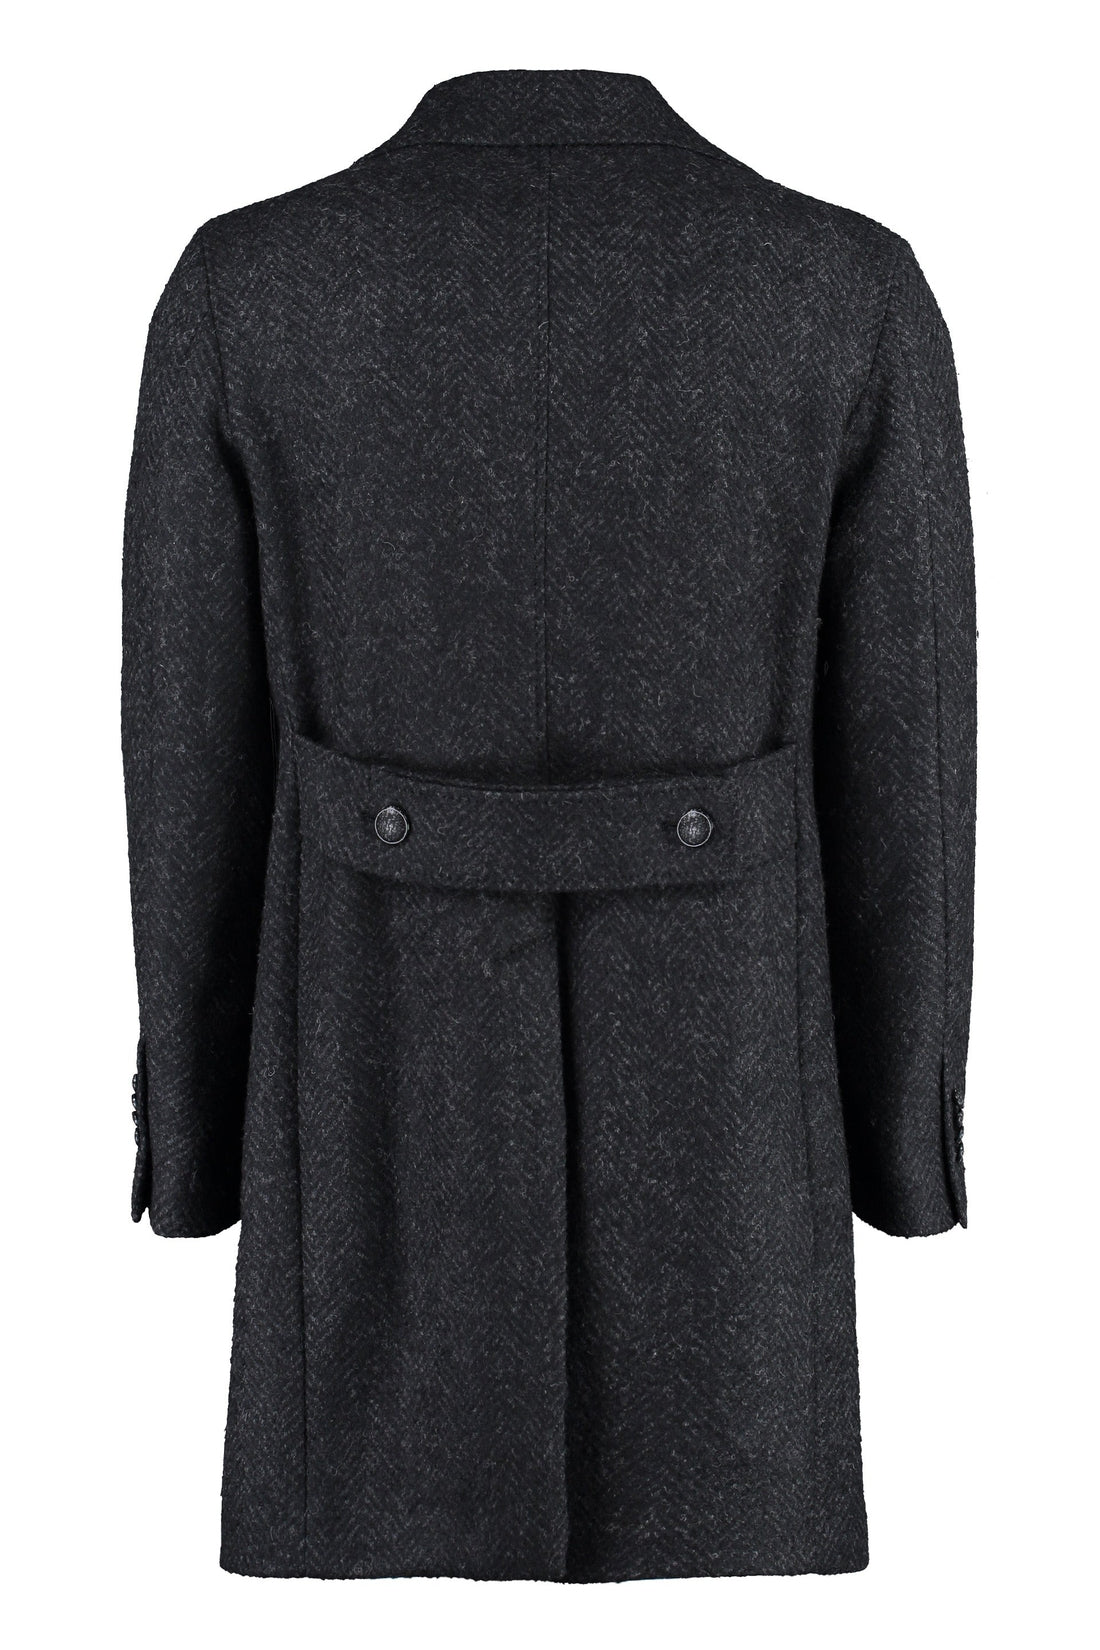 Tagliatore-OUTLET-SALE-Arden double-breasted wool coat-ARCHIVIST